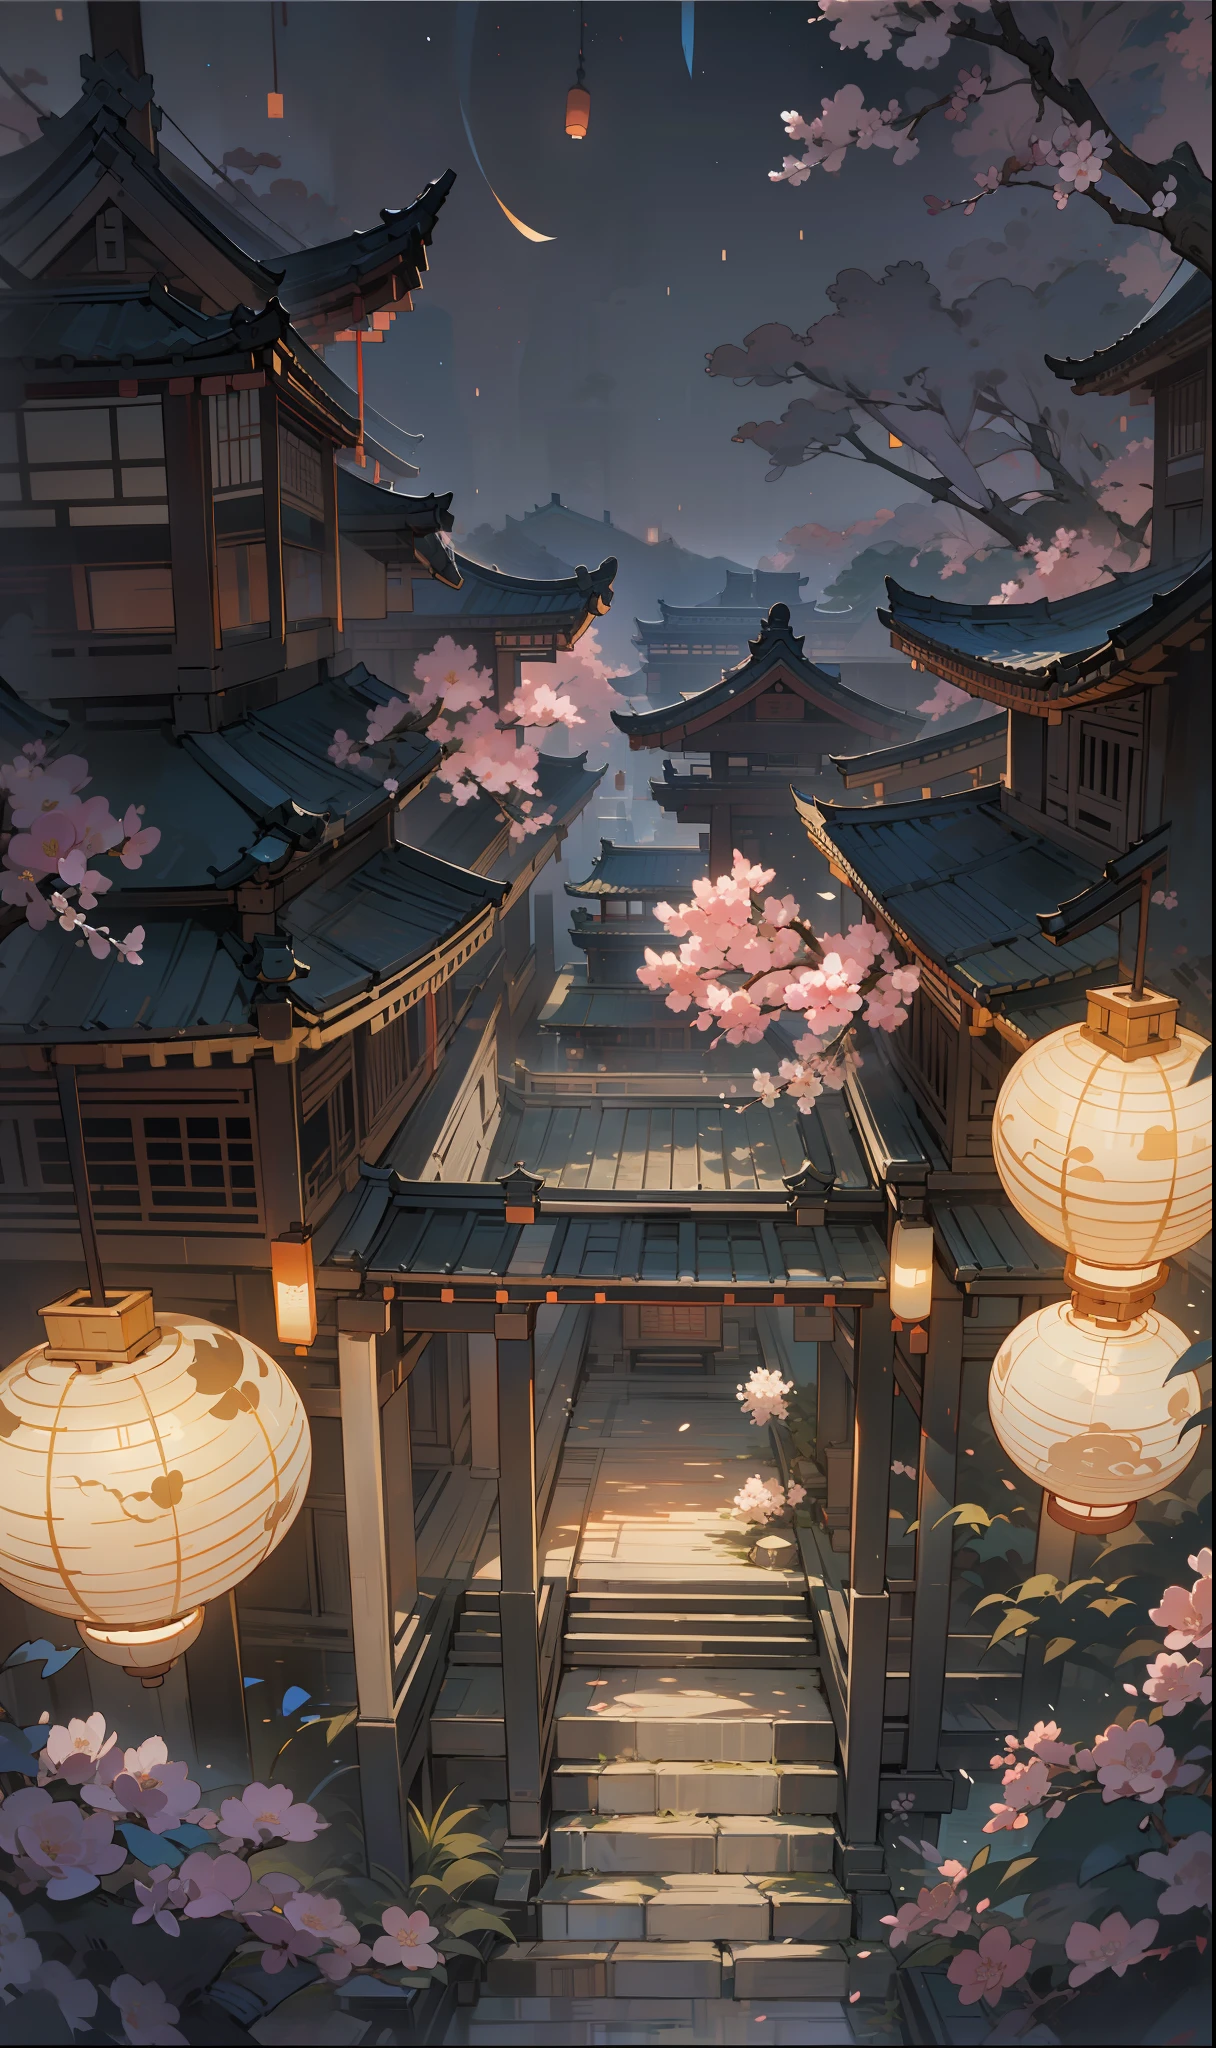 （Microlandscape：1.8，Faraway view，High viewing angle lens），Antique game scene design，A corner of the ancient town of Jiangnan，Black night sky，the night，starrysky，Lanterns，big trees，florals，Flowers in the bushes，Trees bloom，Sakura architecture，Antique carved door beams，Chinese ink painting OC rendering sculpture